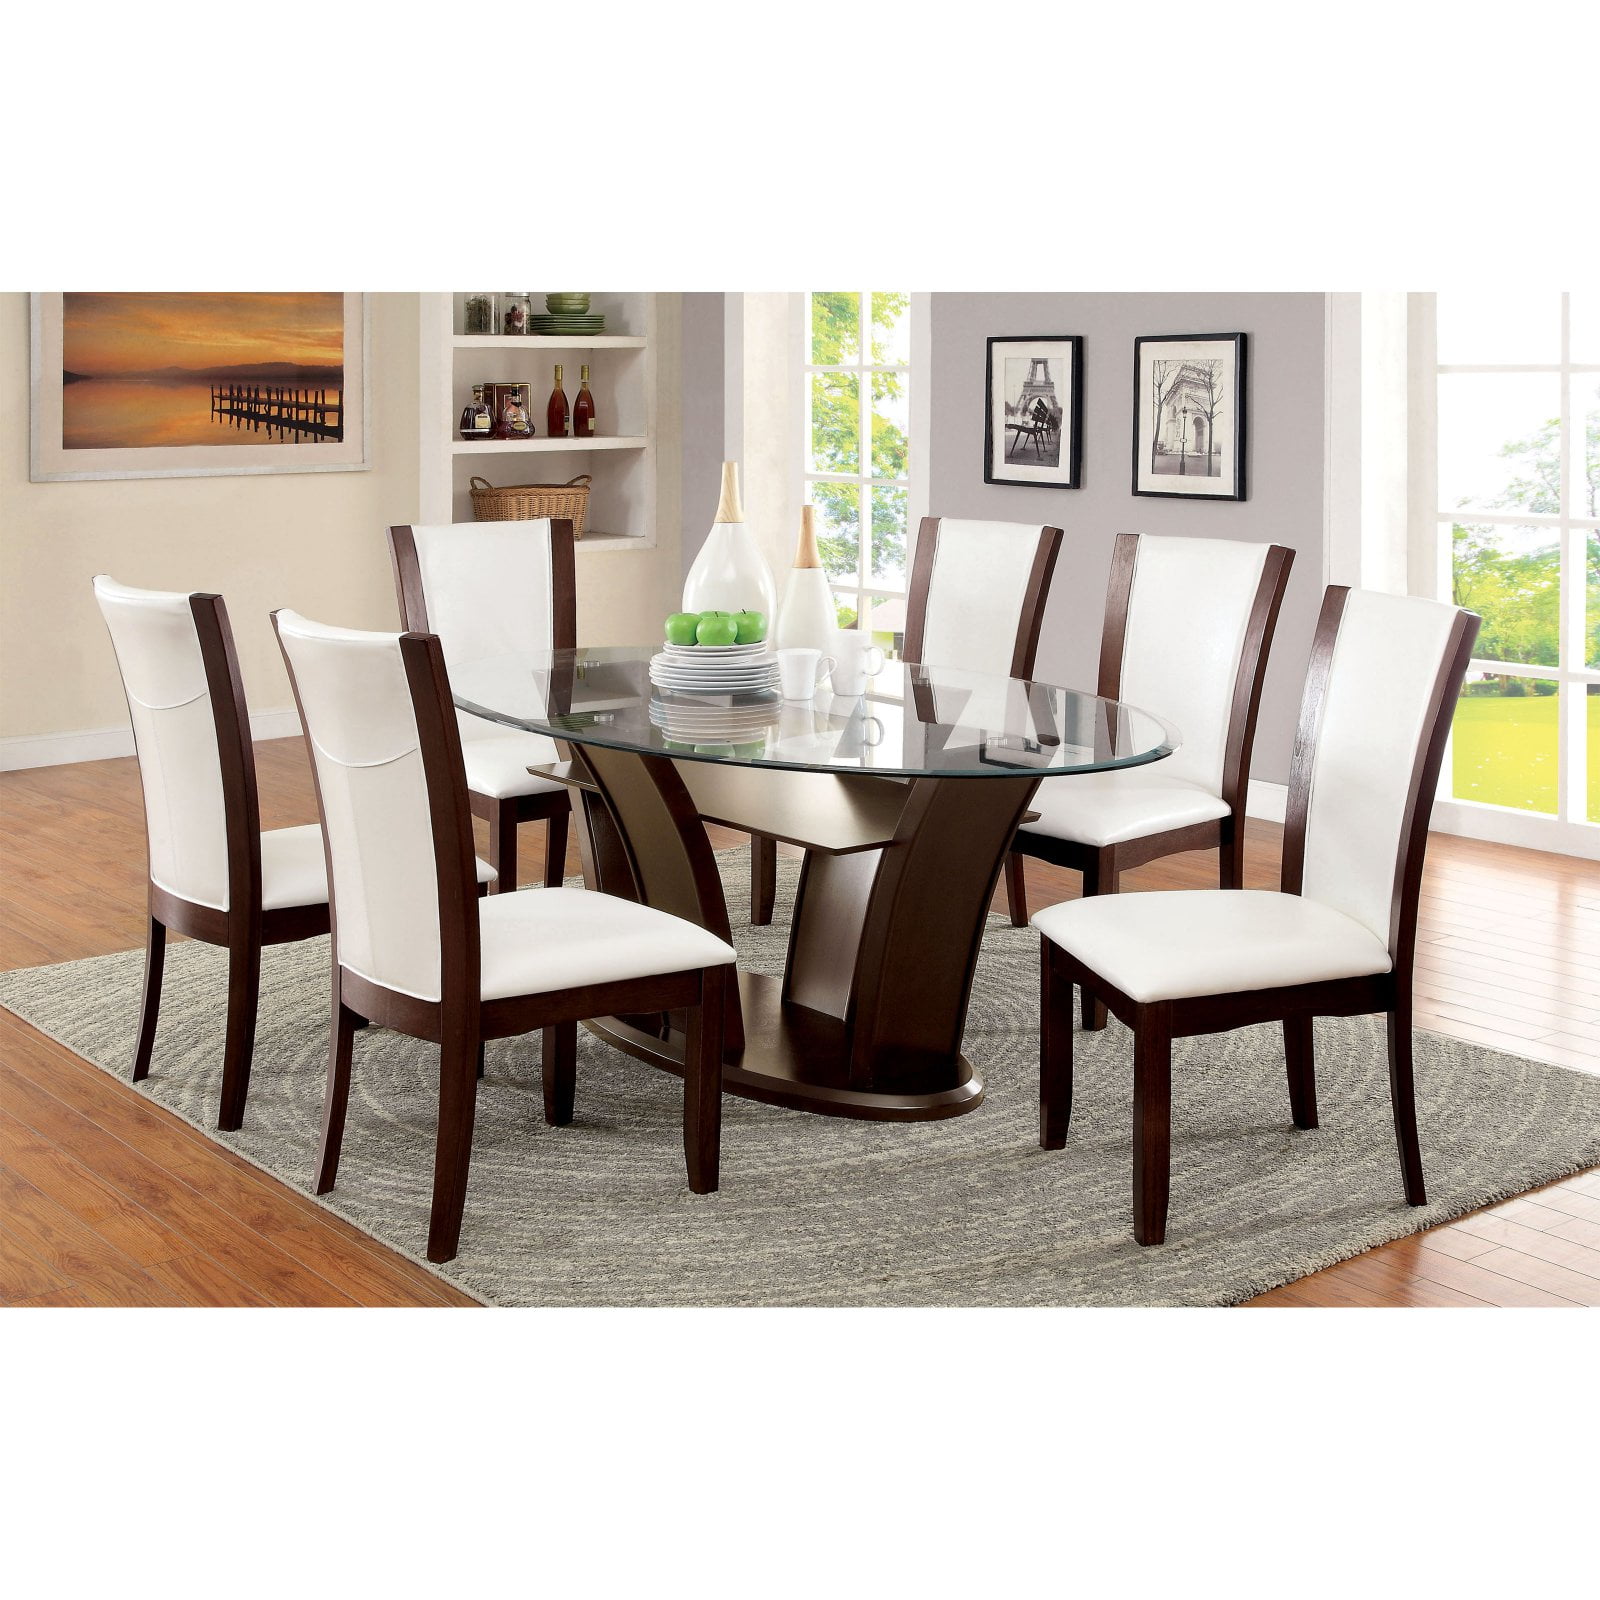 Furniture of America Lavelle 7 Piece Tempered Glass Top Dining Table